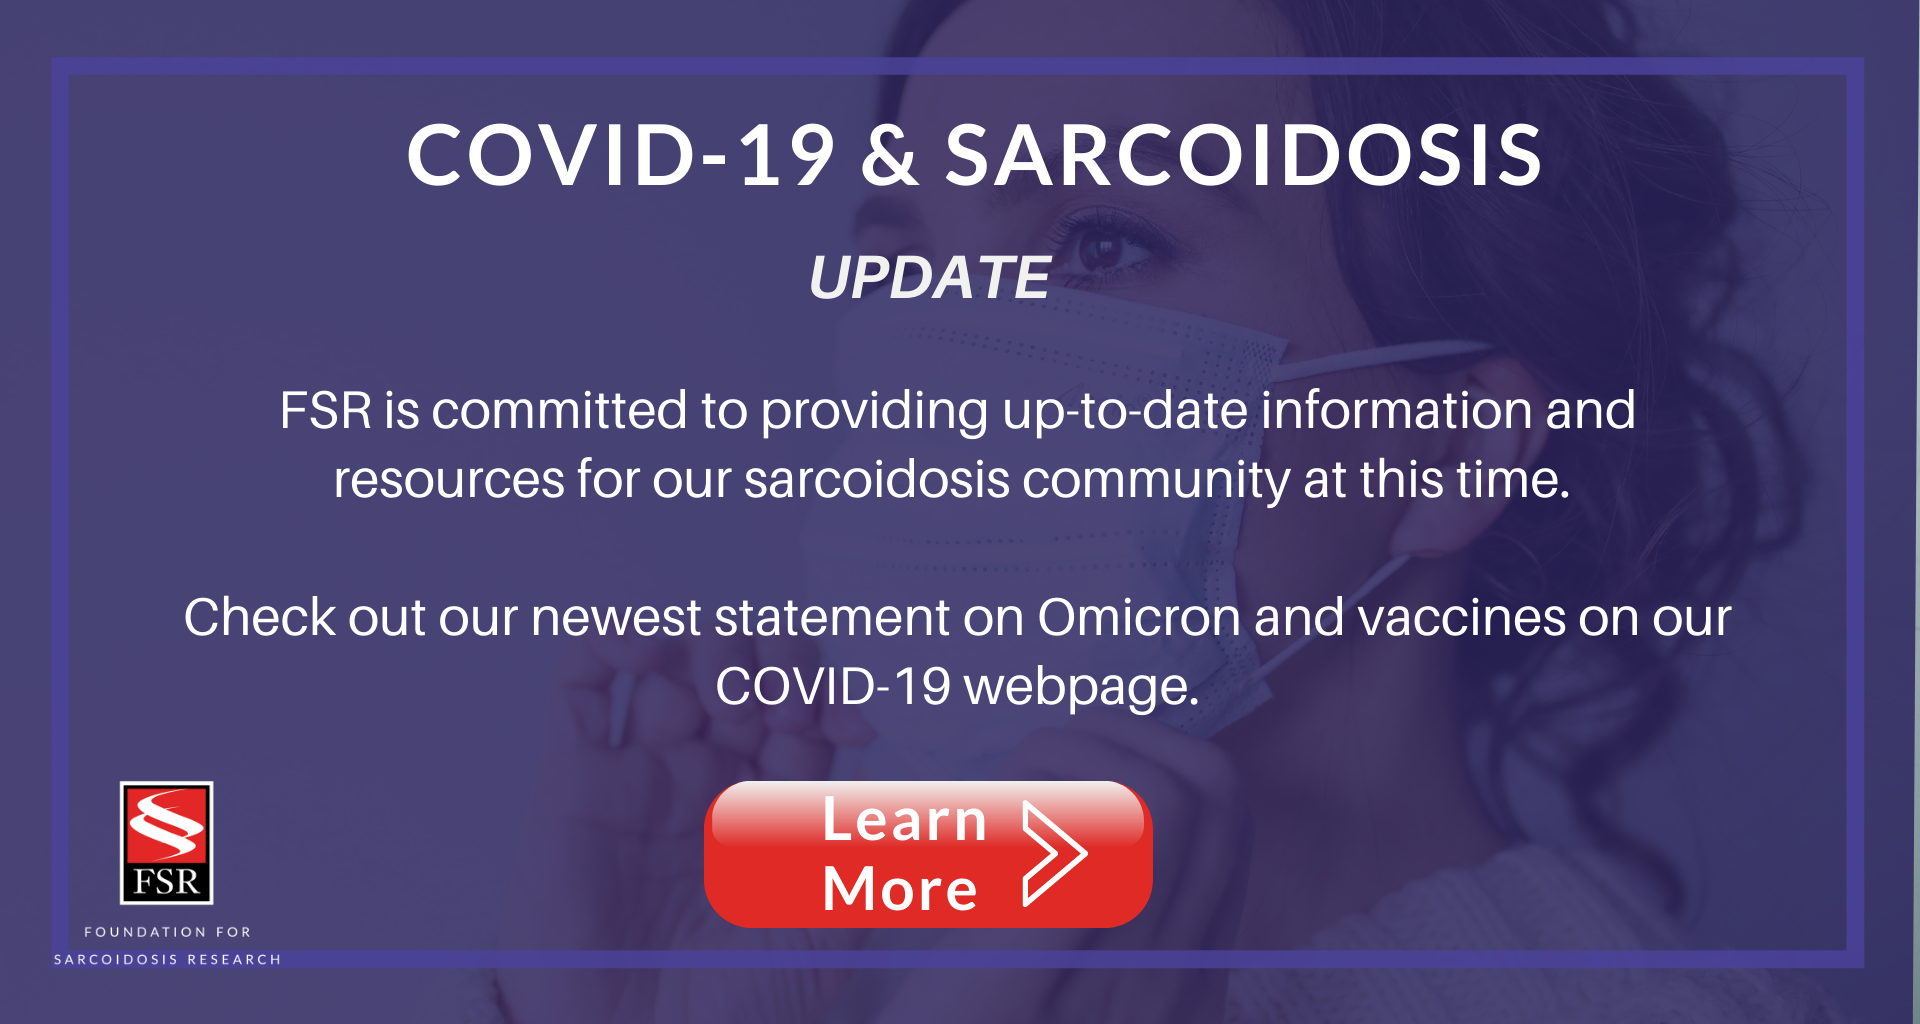 COVID-19 & Sarcoidosis Update